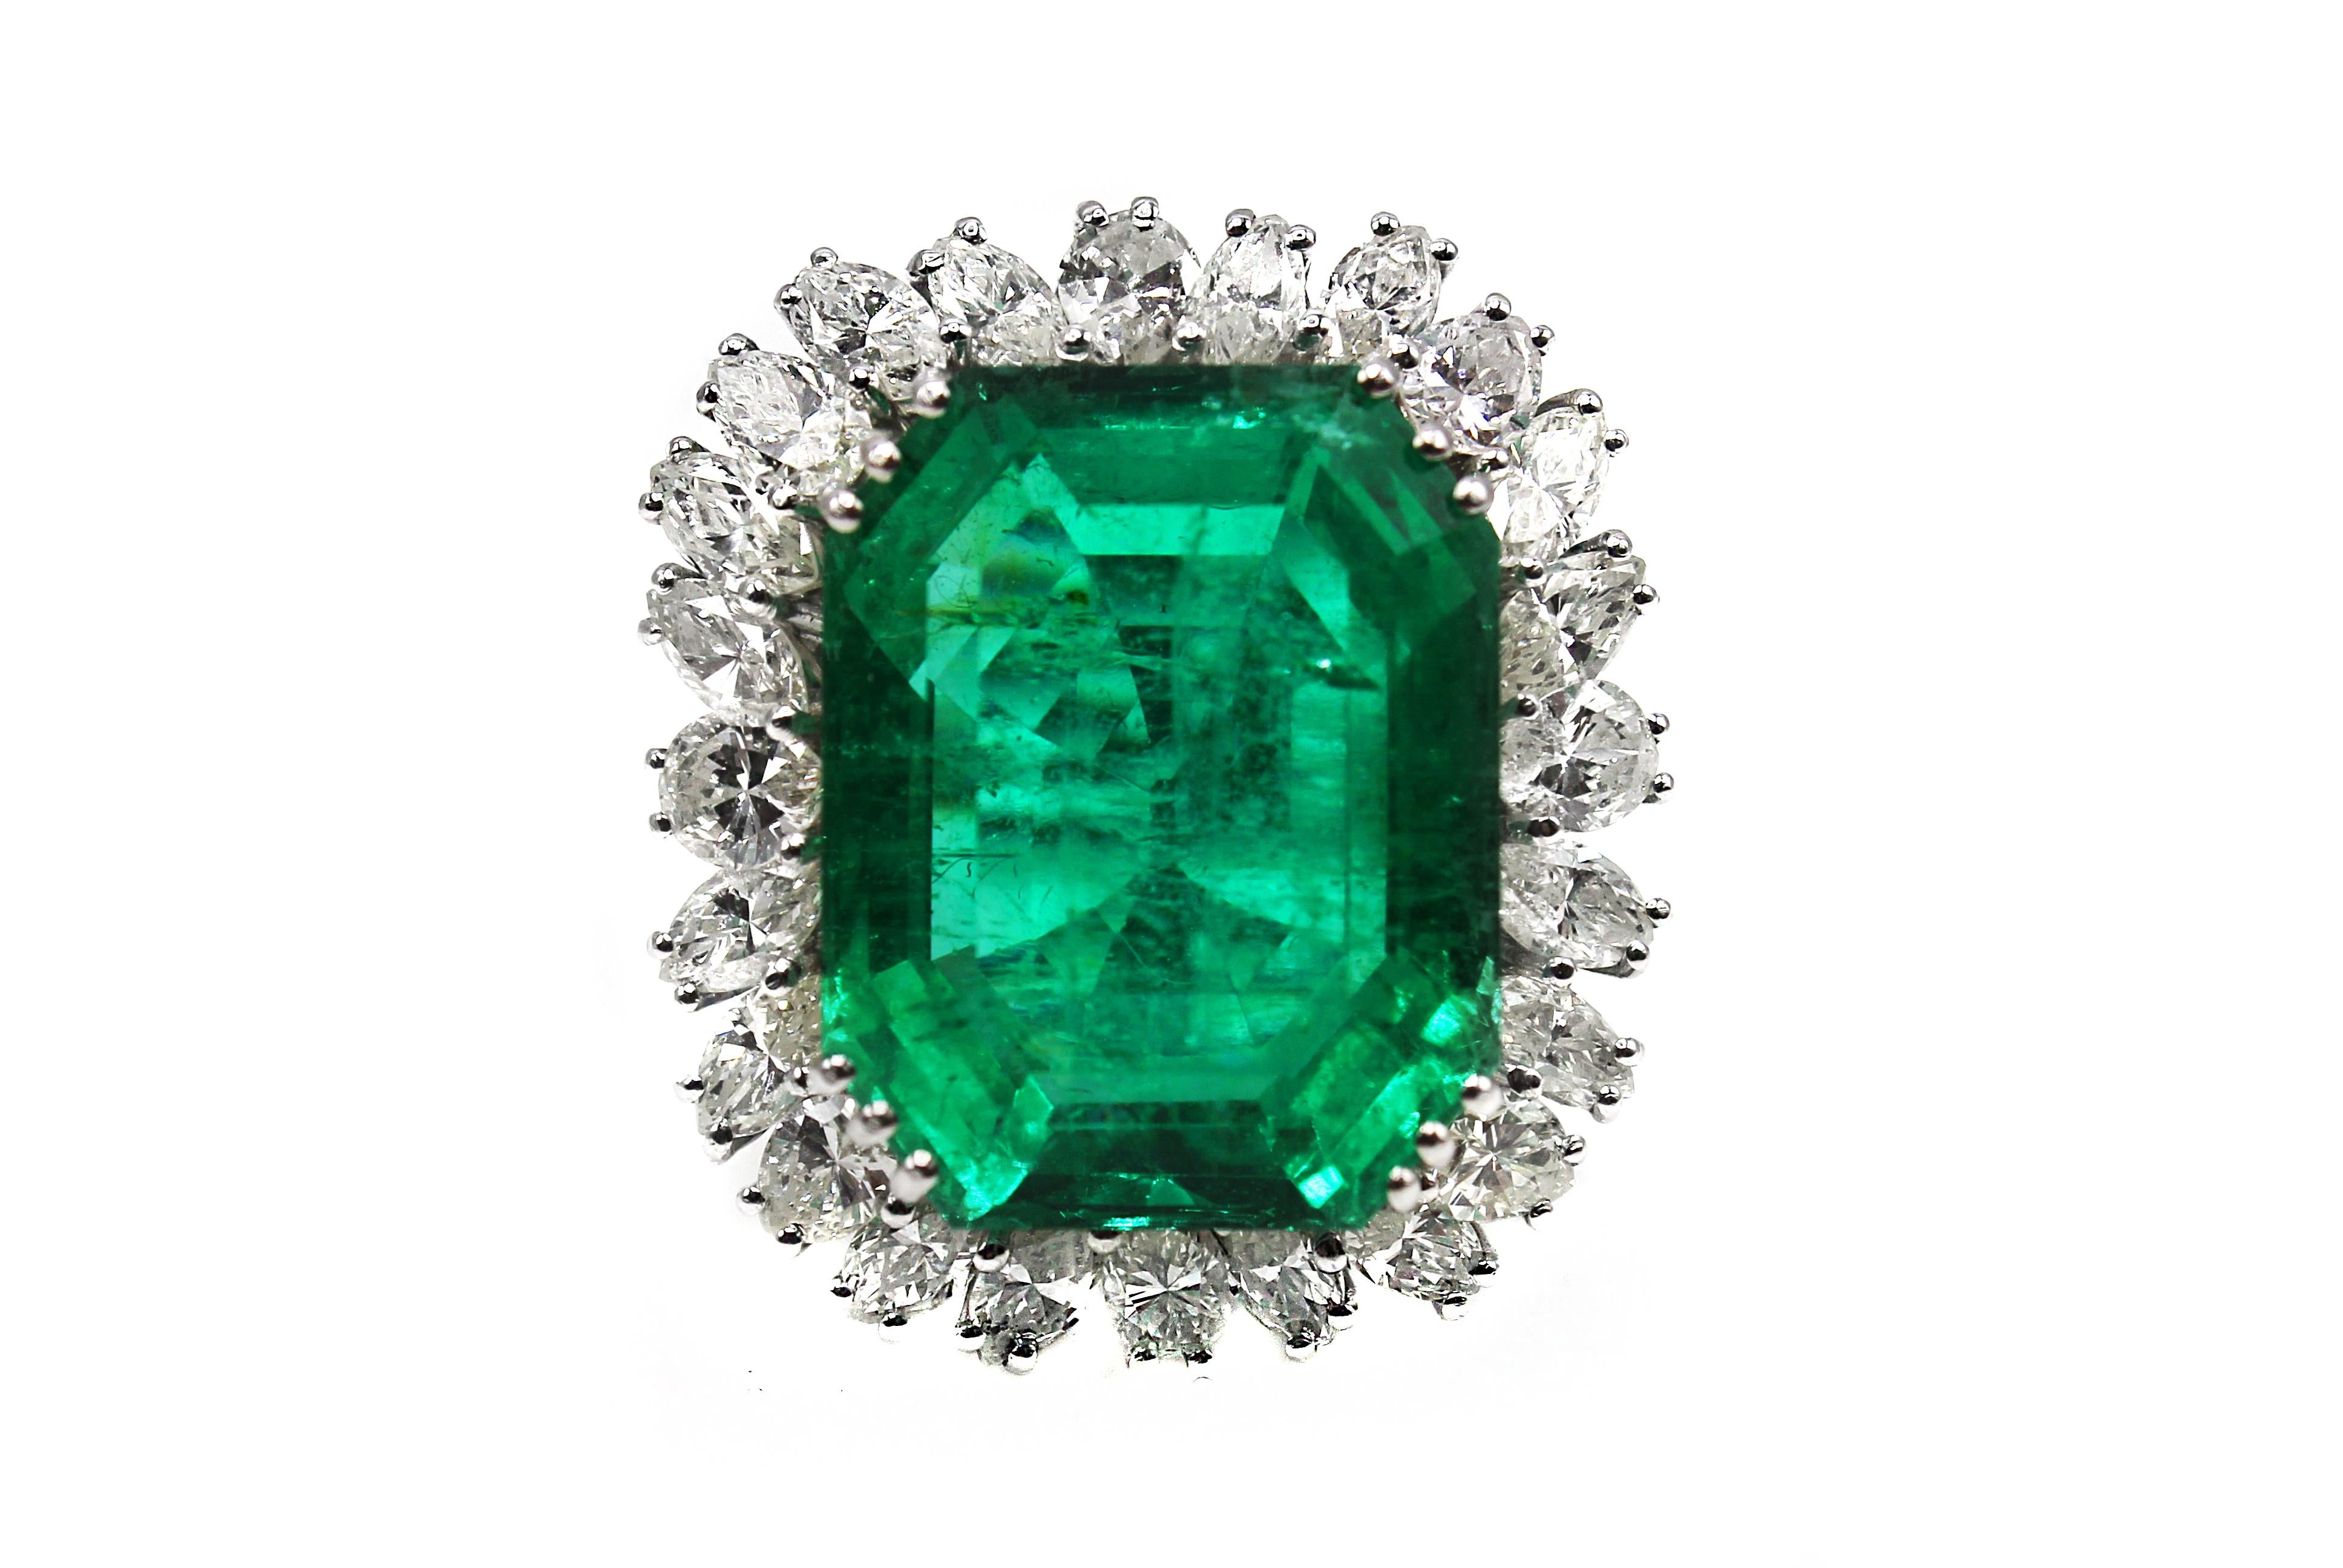 Magnificent Natural Colombian Emerald, weighing approximately 25 carats, set in a custom hand crafted 18 karat white gold mounting. Triple prong set at each corner secure this center gem and it is surrounded by 25 marquise cut and pear shape bright,